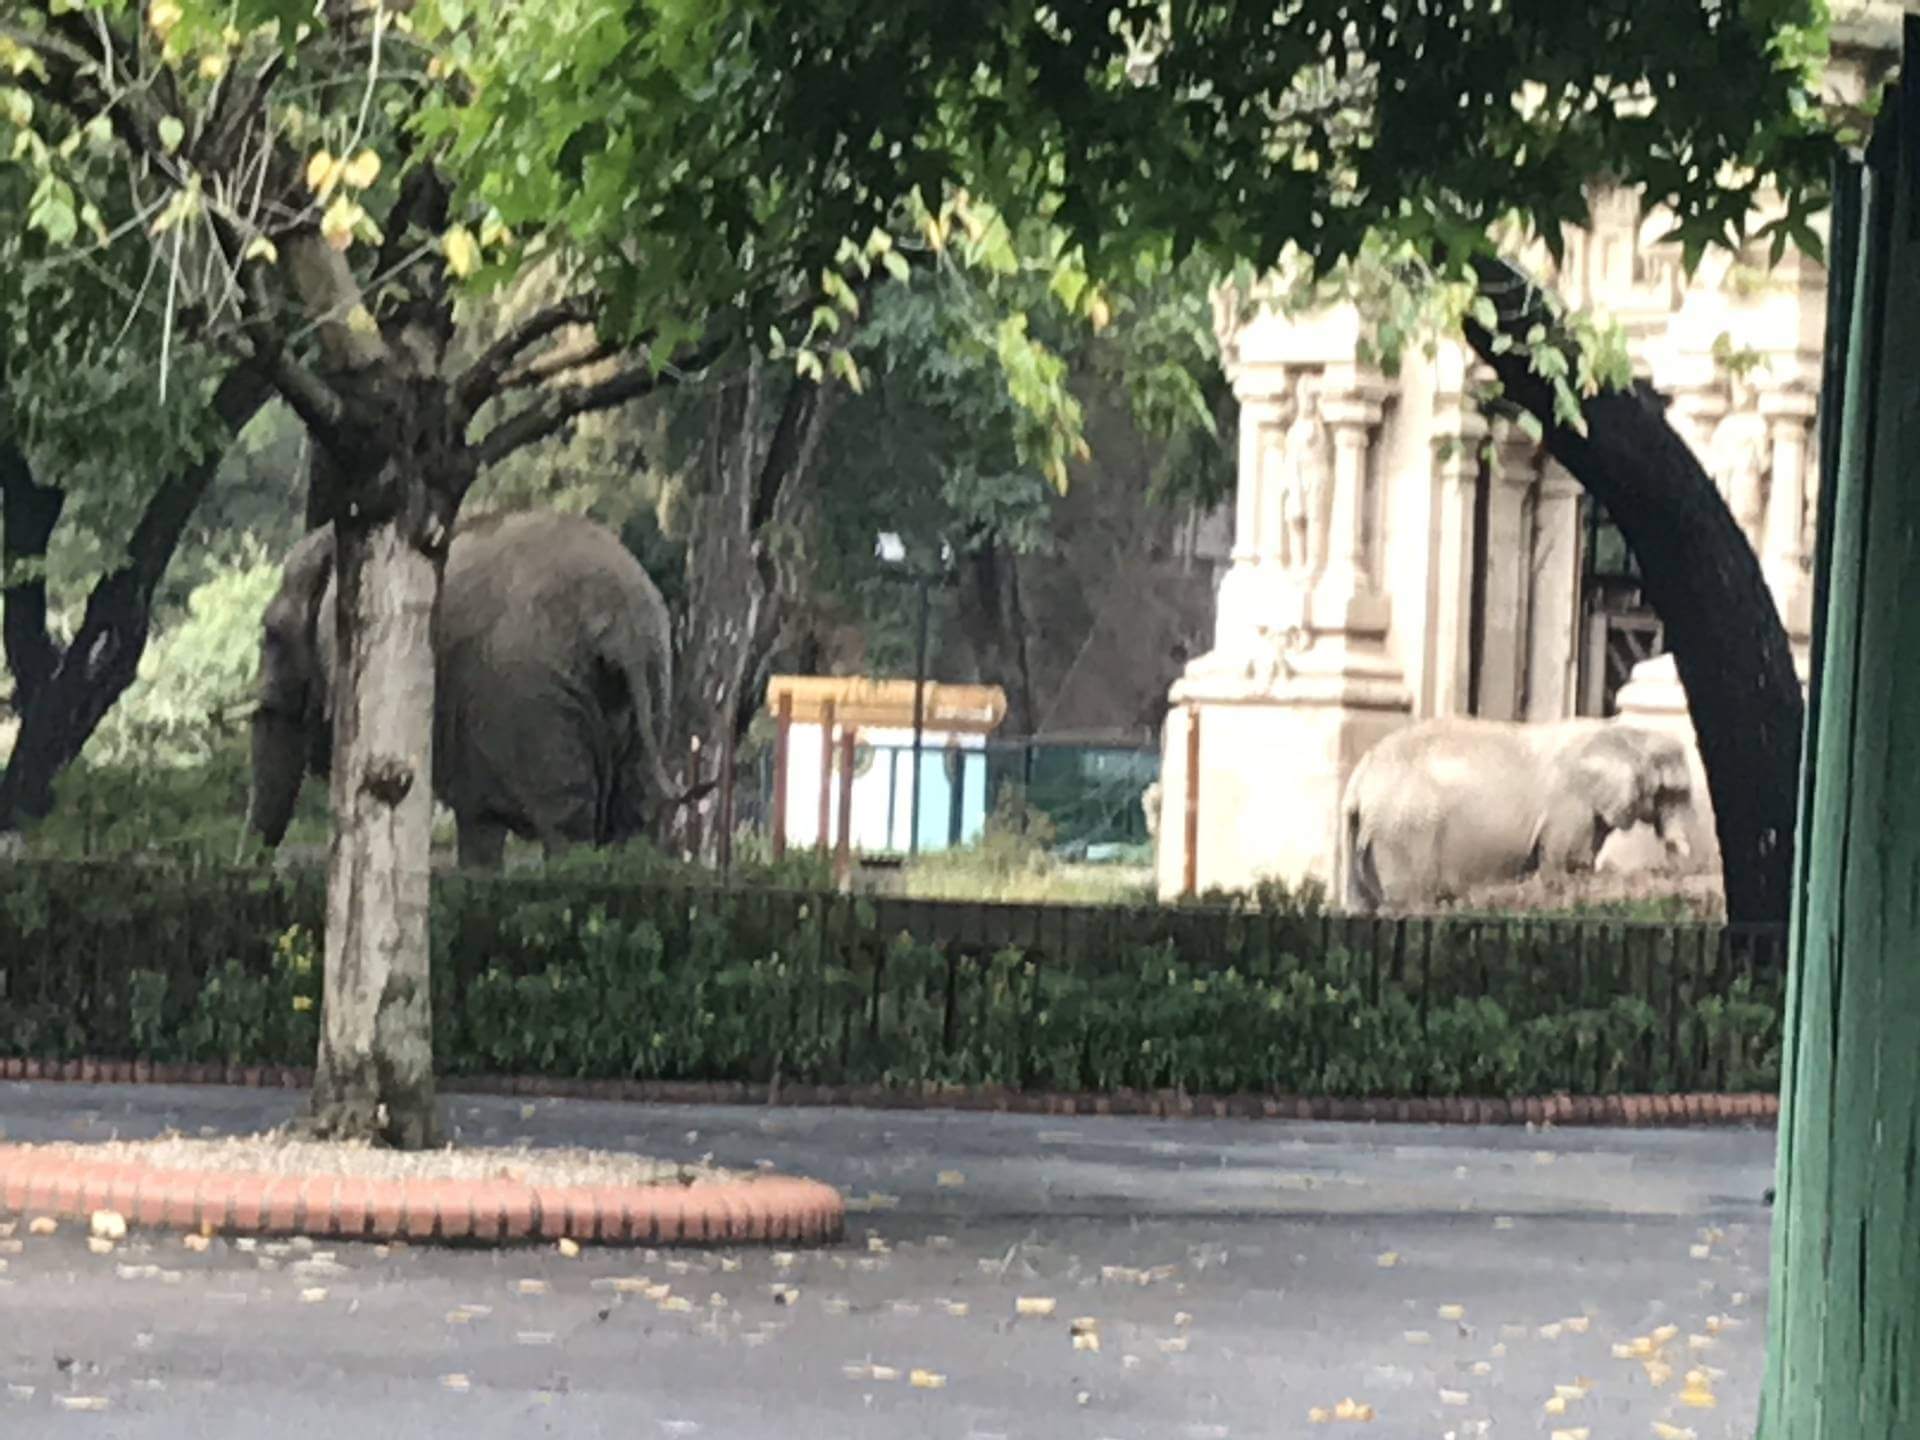 Elephants in Buenos Aires at their residence